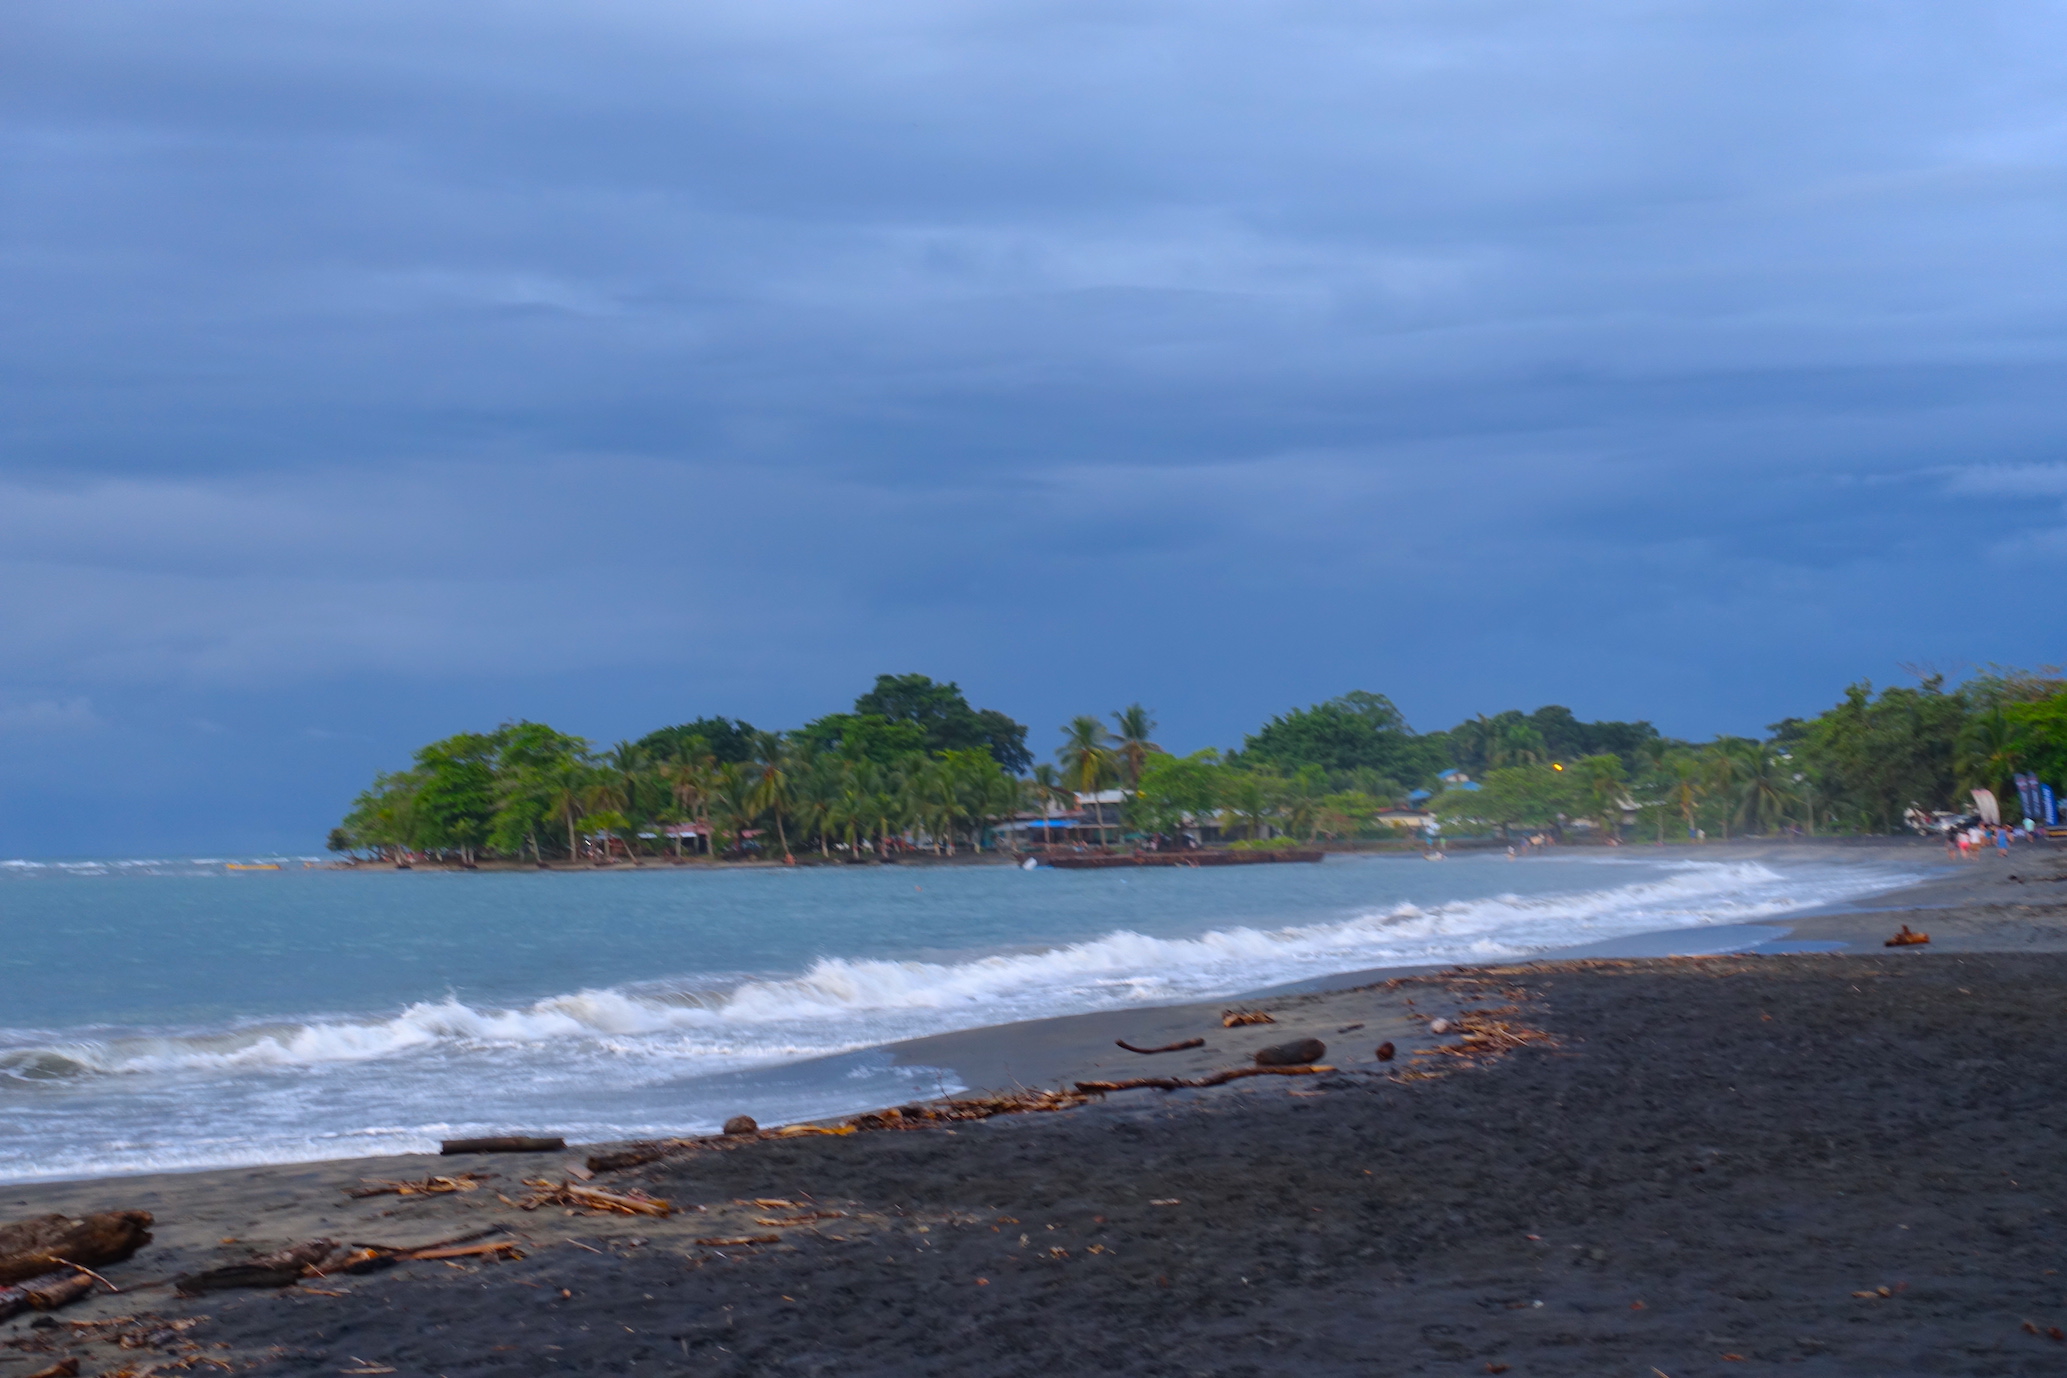 One of longest Puerto Viejo beaches, Playa Negra. You can see the black sand beach, town and waves.